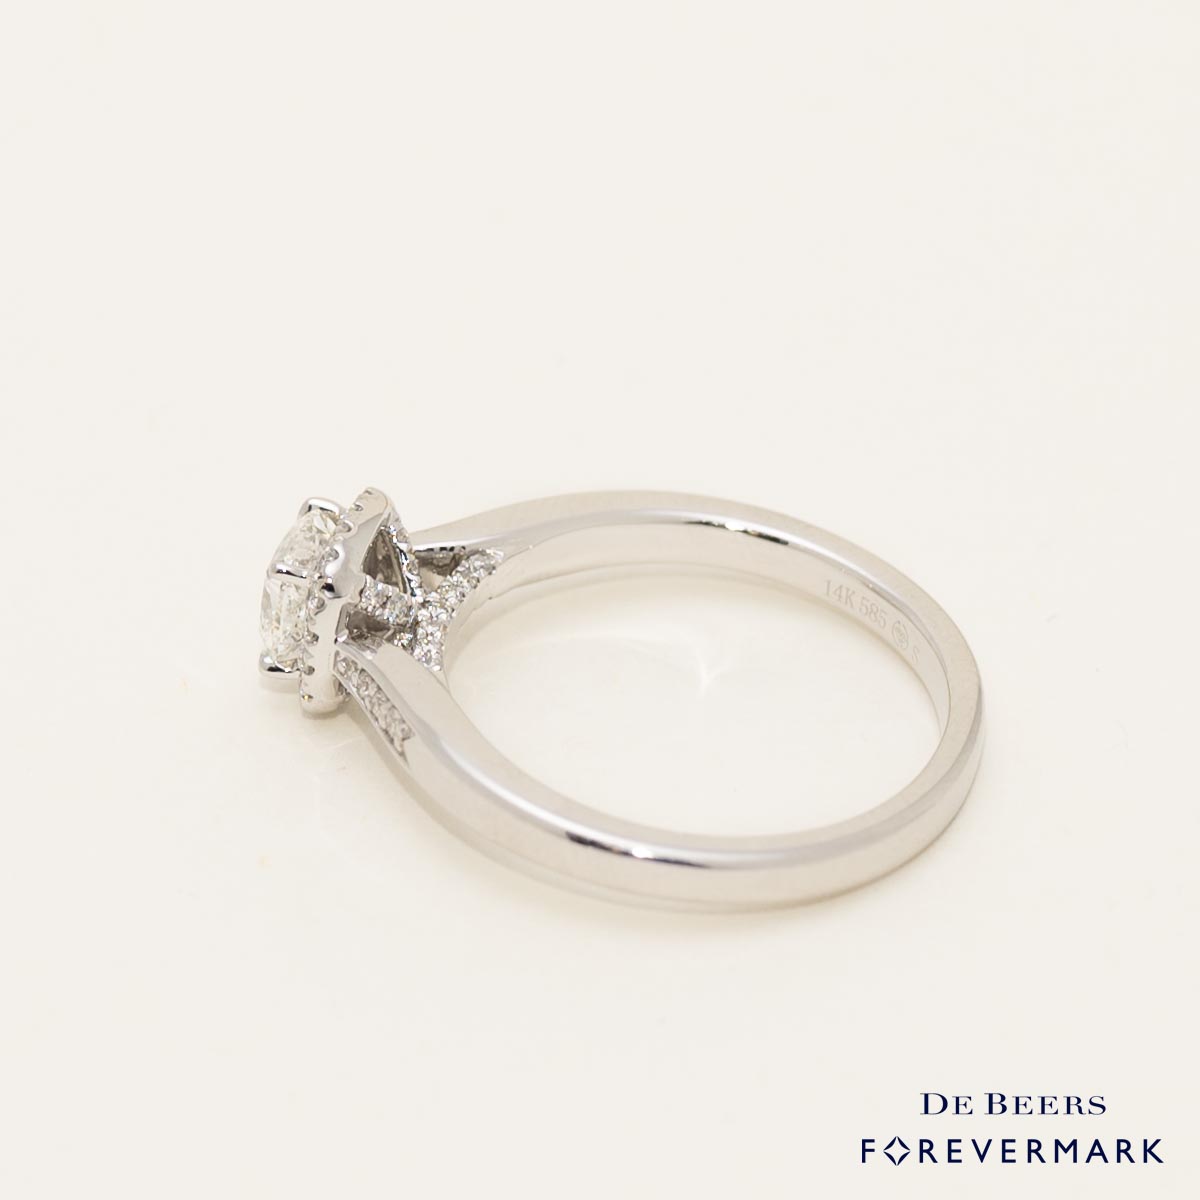 De Beers Forevermark Cushion Diamond Halo Engagement Ring in 14kt White Gold (3/4ct tw)